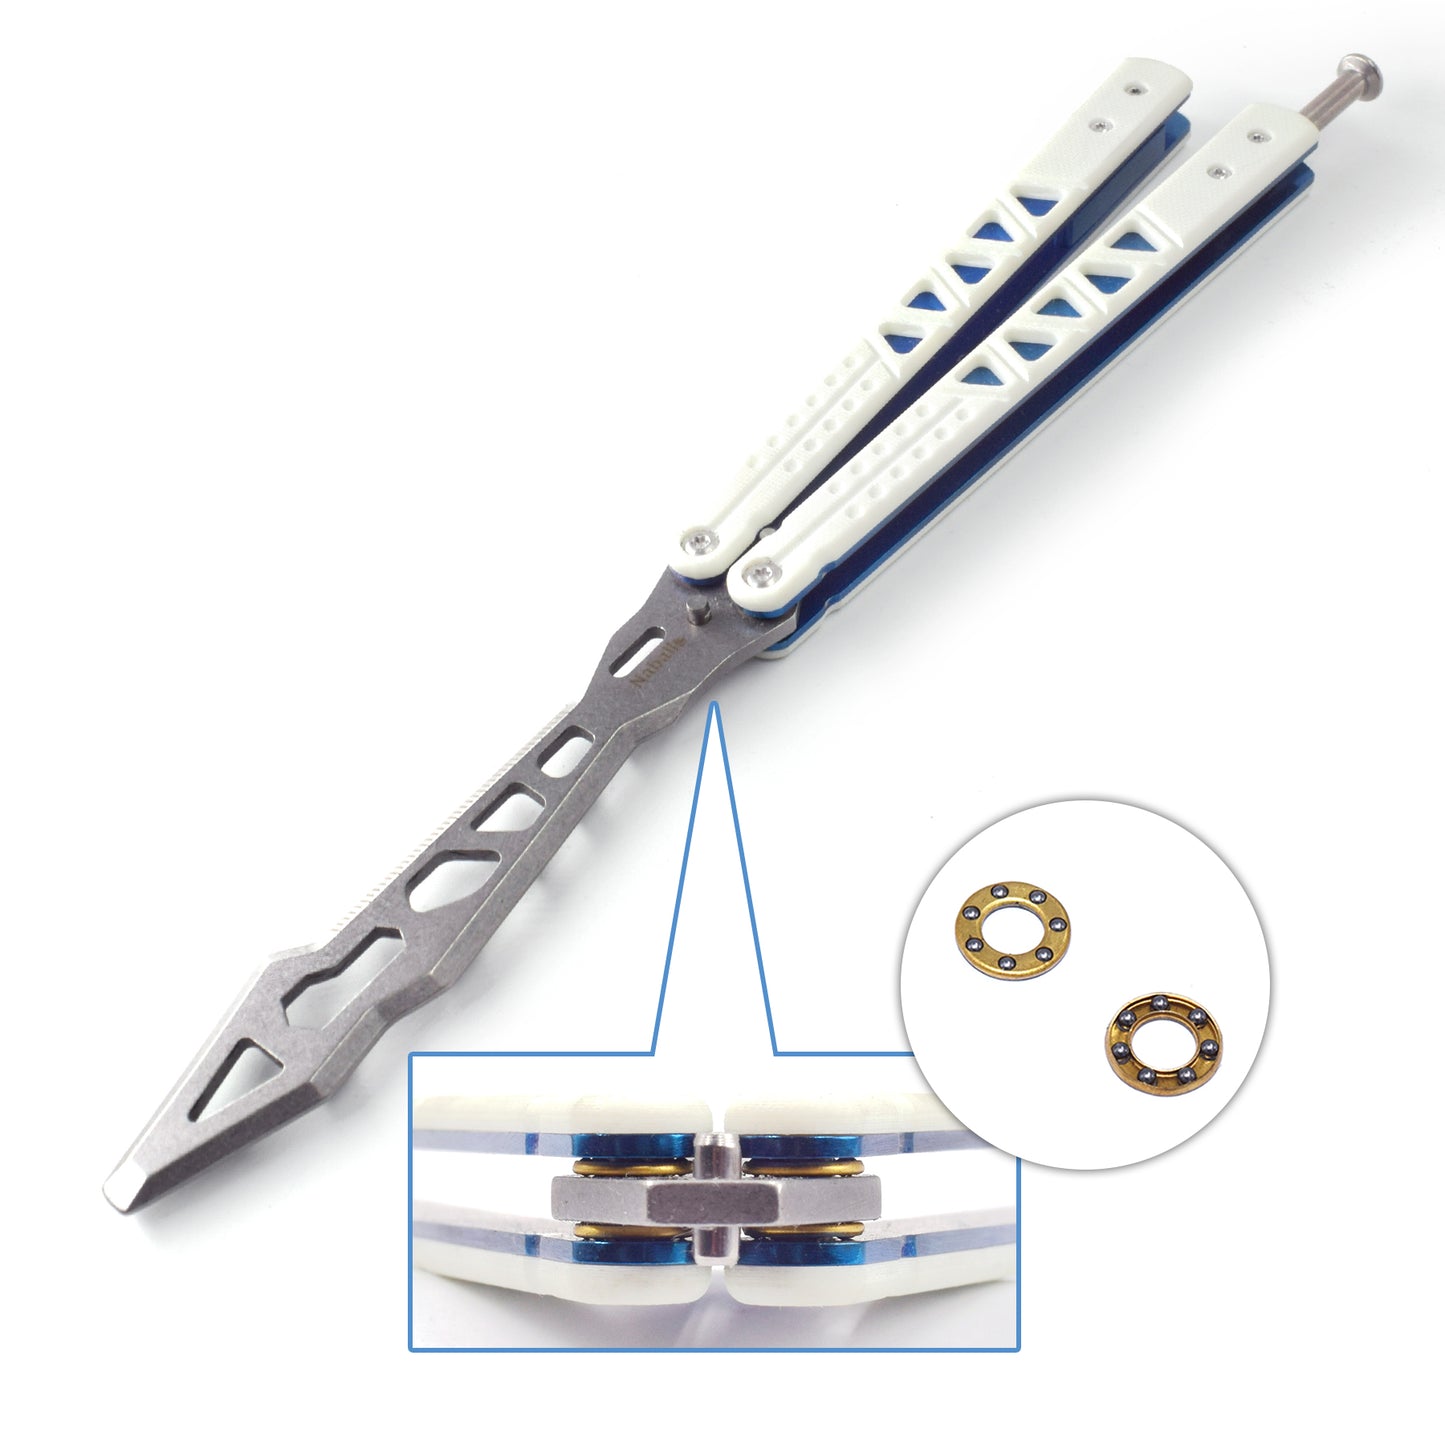 Nabalis G10 Balisong Butterfly Knife Trainer-Lightweight-Details in washers